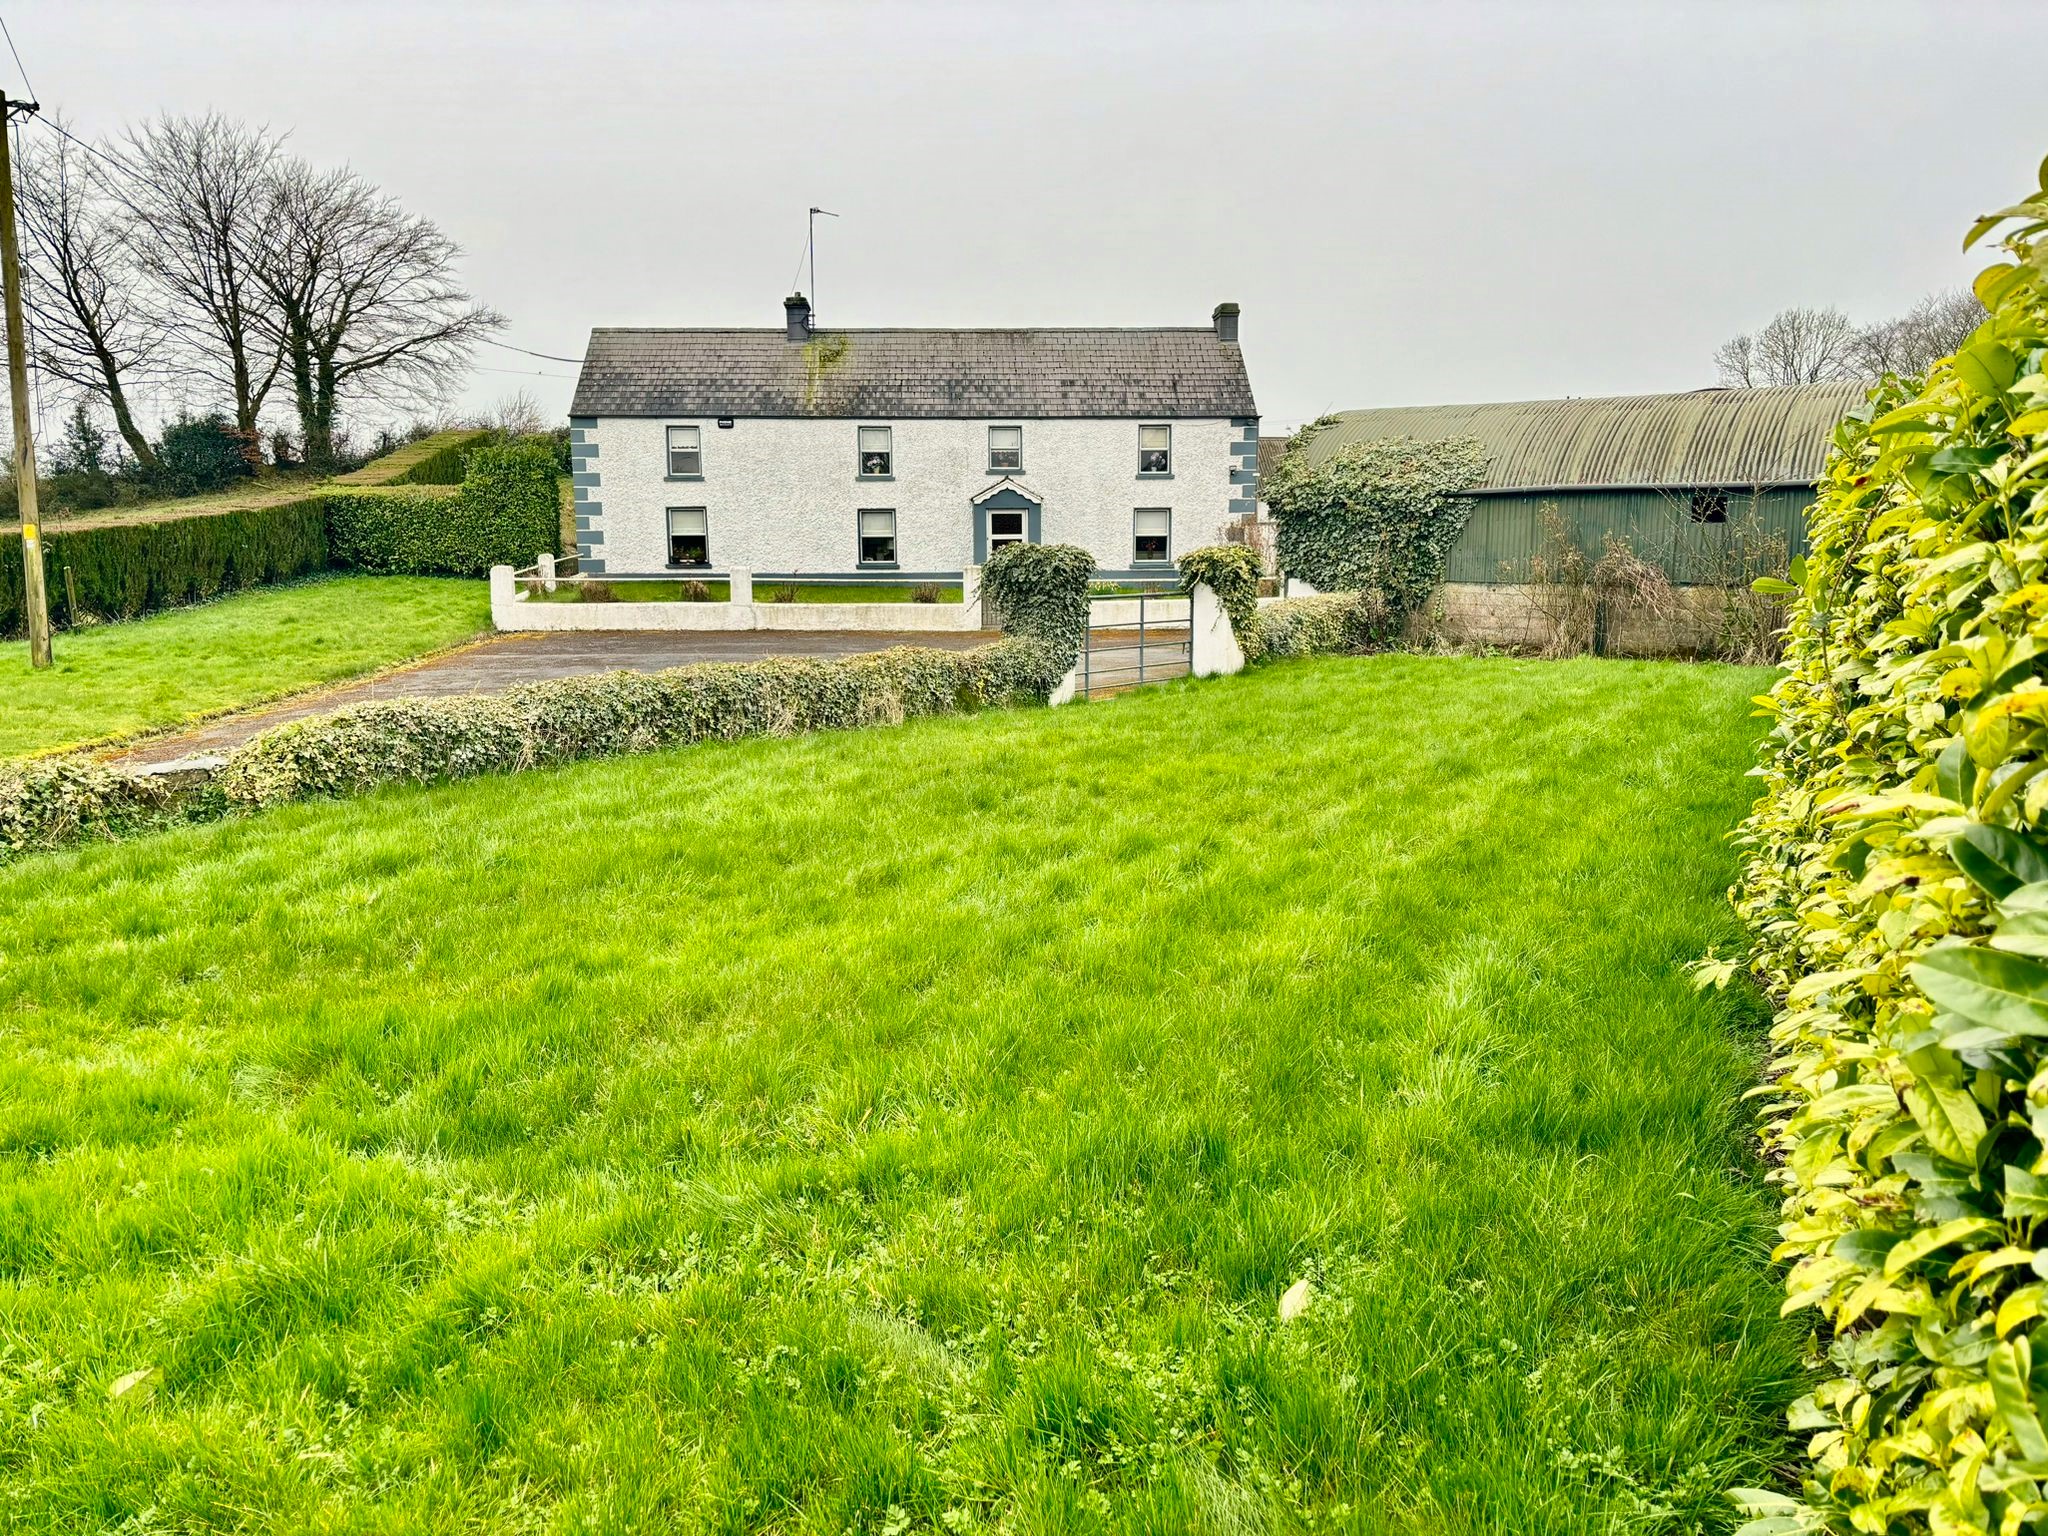 3 bed farmhouse in a farmyard setting at Raggetstown, Ballinakill, Co Laois for sale with Hennessy Auctioneers